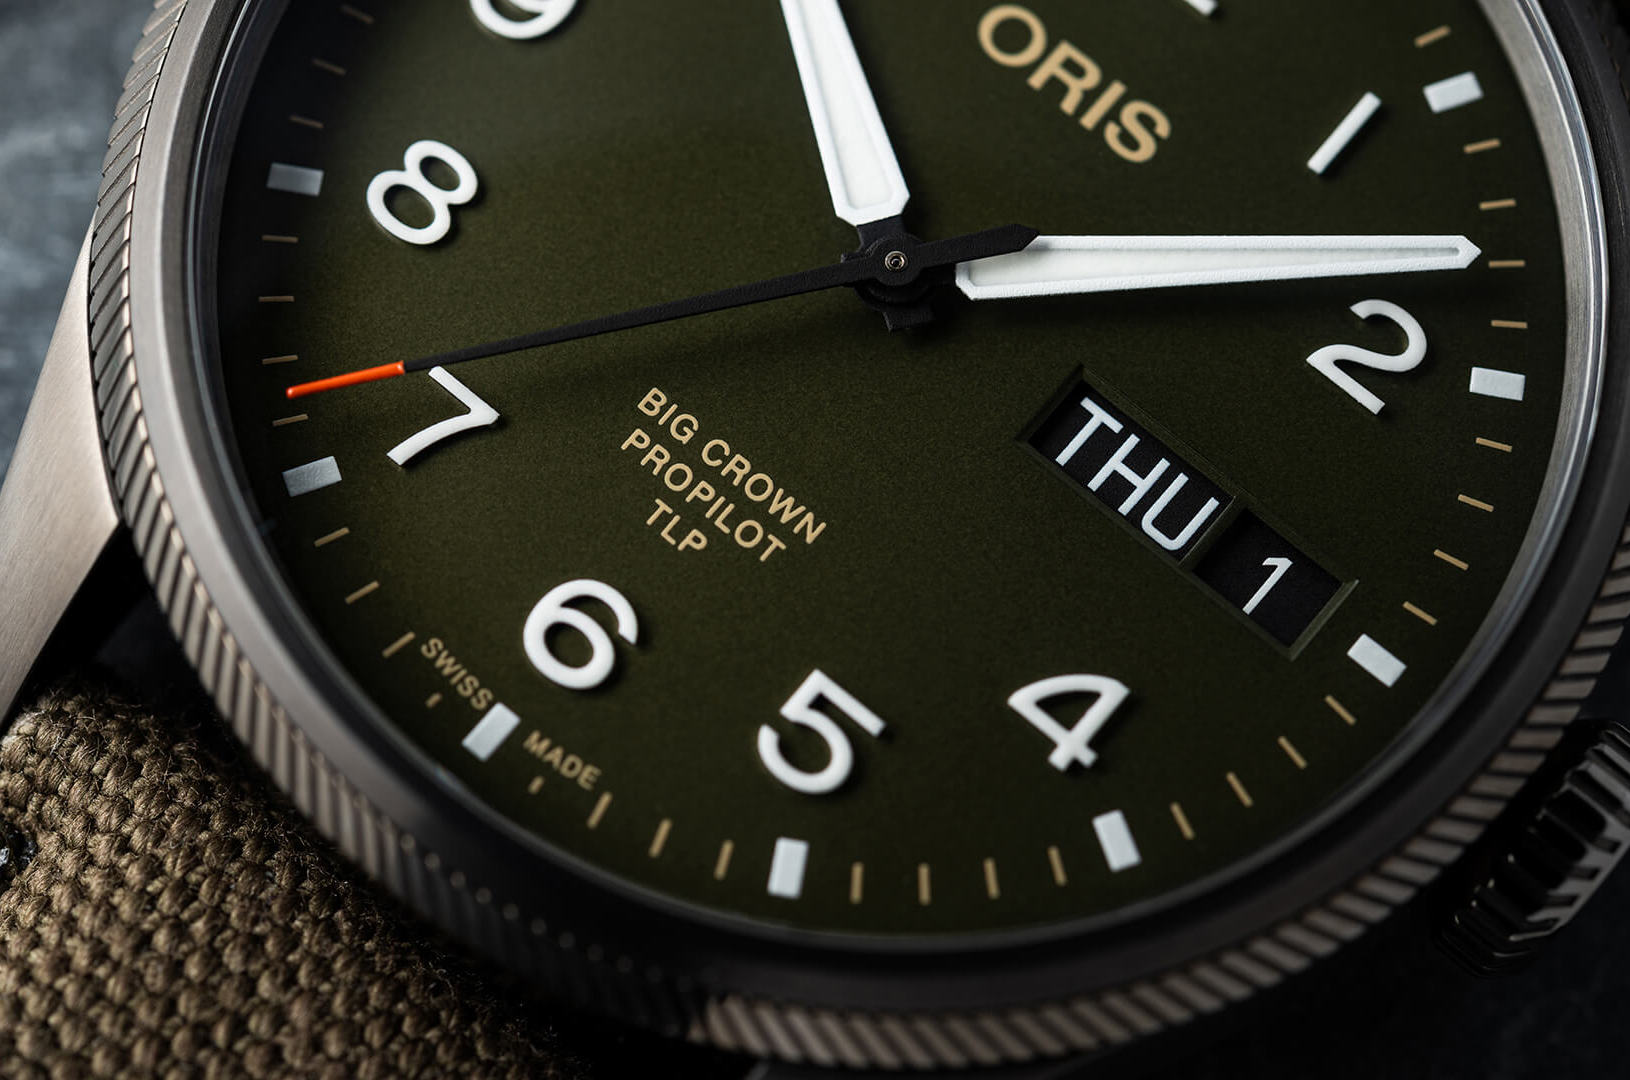 Oris Big Crown ProPilot Day Date TLP Limited Edition